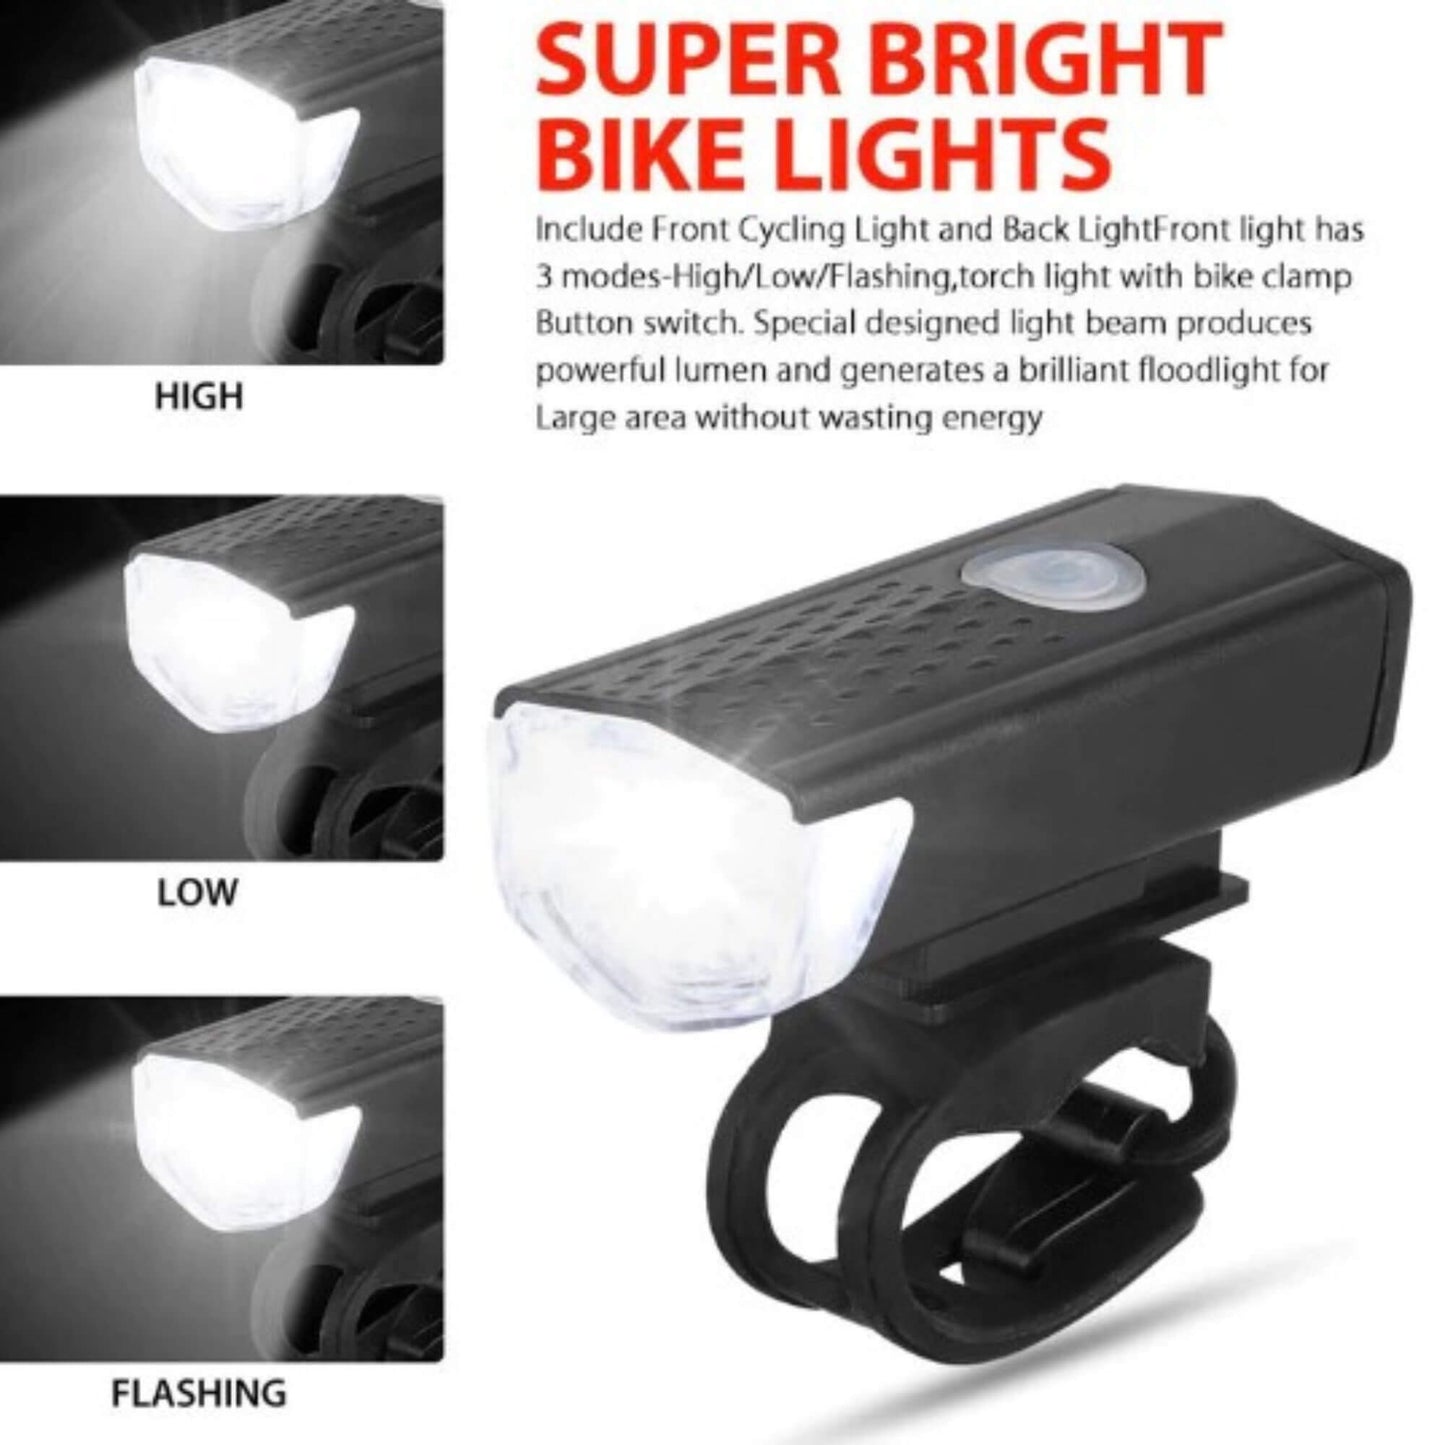 Front Bicycle light with 3 modes